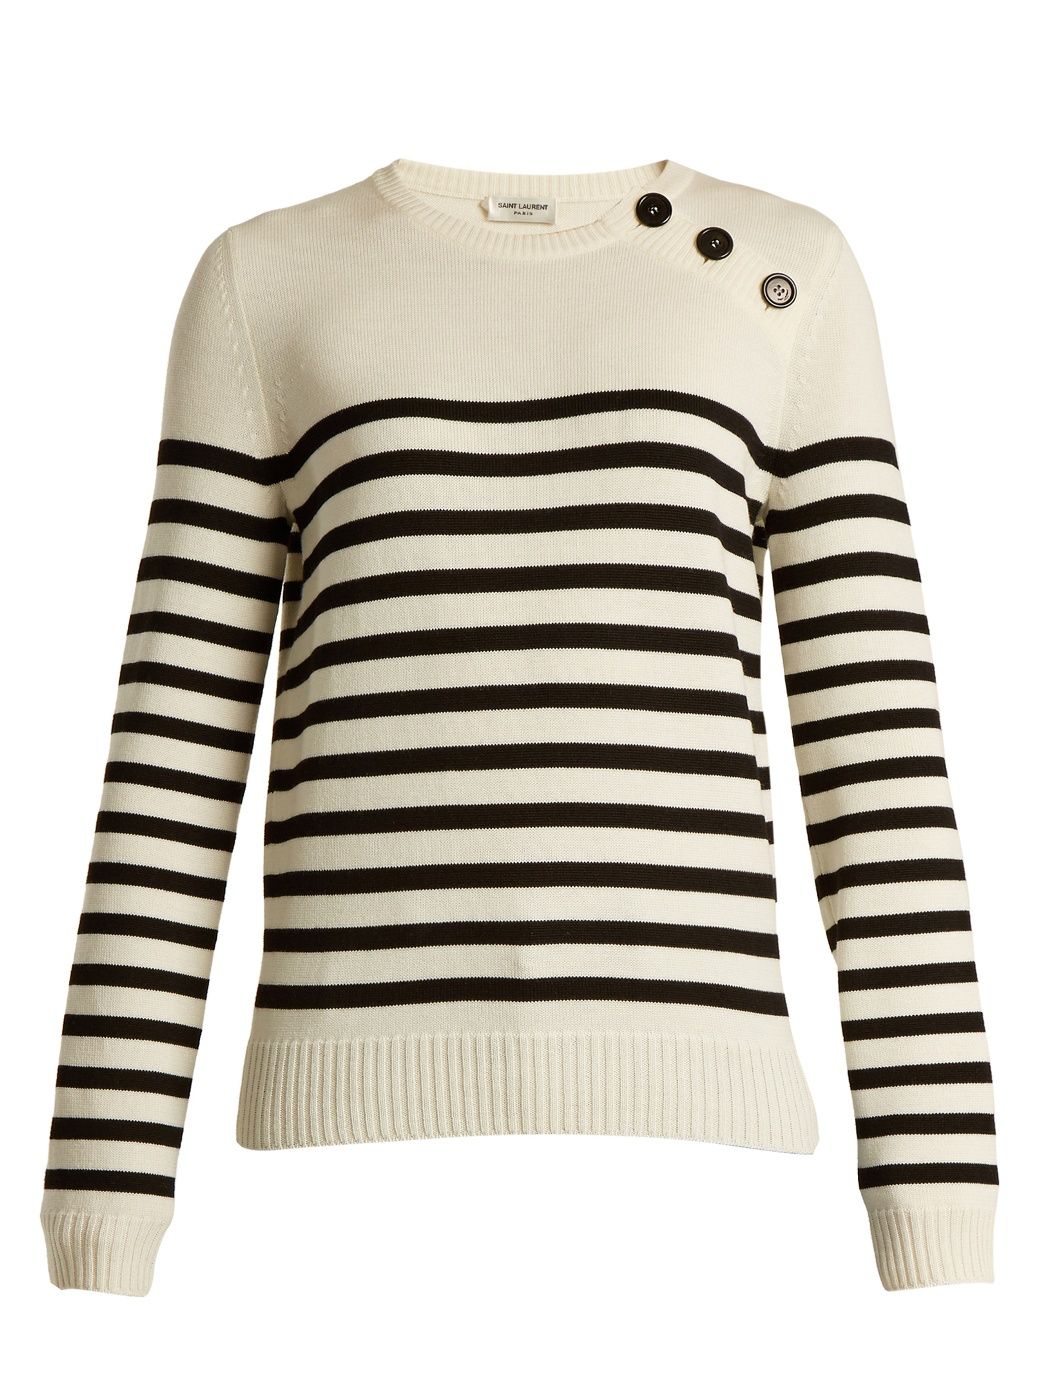 Trending Stripes, Women's Striped Knit Sweaters, Striped Button-up Shirts,  Striped Tees